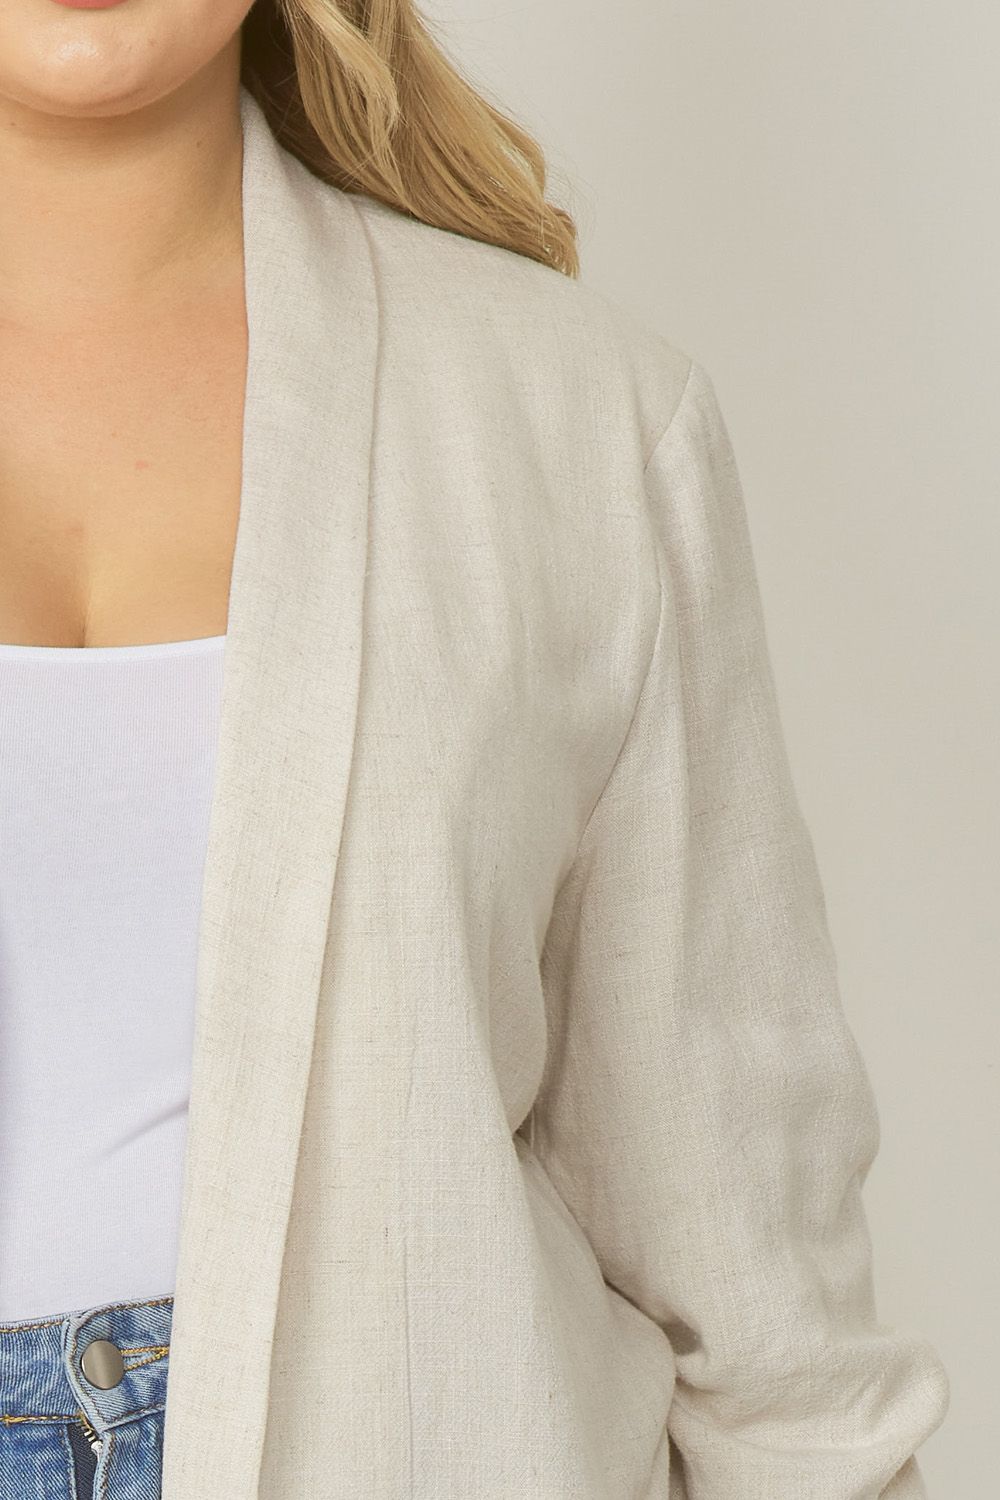 Solid Blazer Jacket with Shirred Detail Sleeve in Plus Size by Entro Clothing